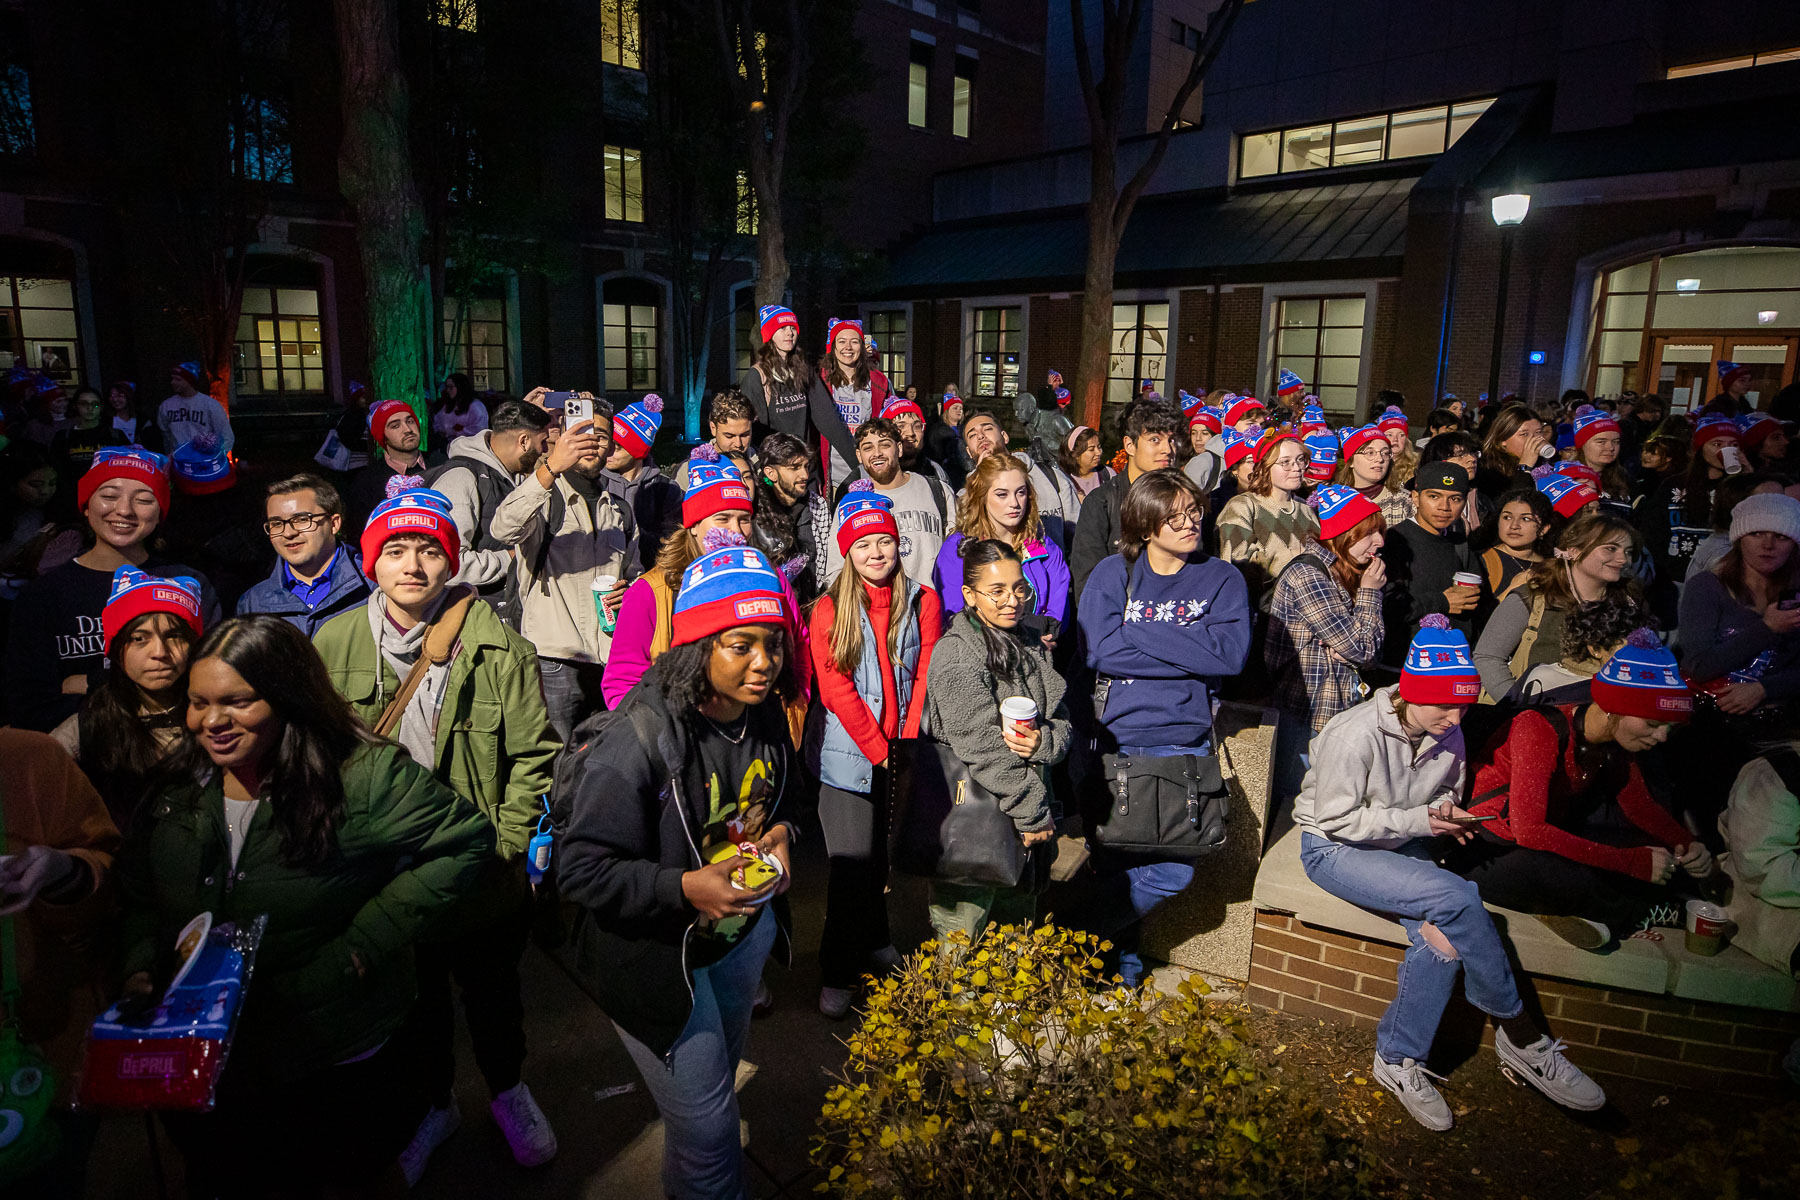 Students wait with bated breath for the lighting. (Photo by Jeff Carrion / DePaul University) 